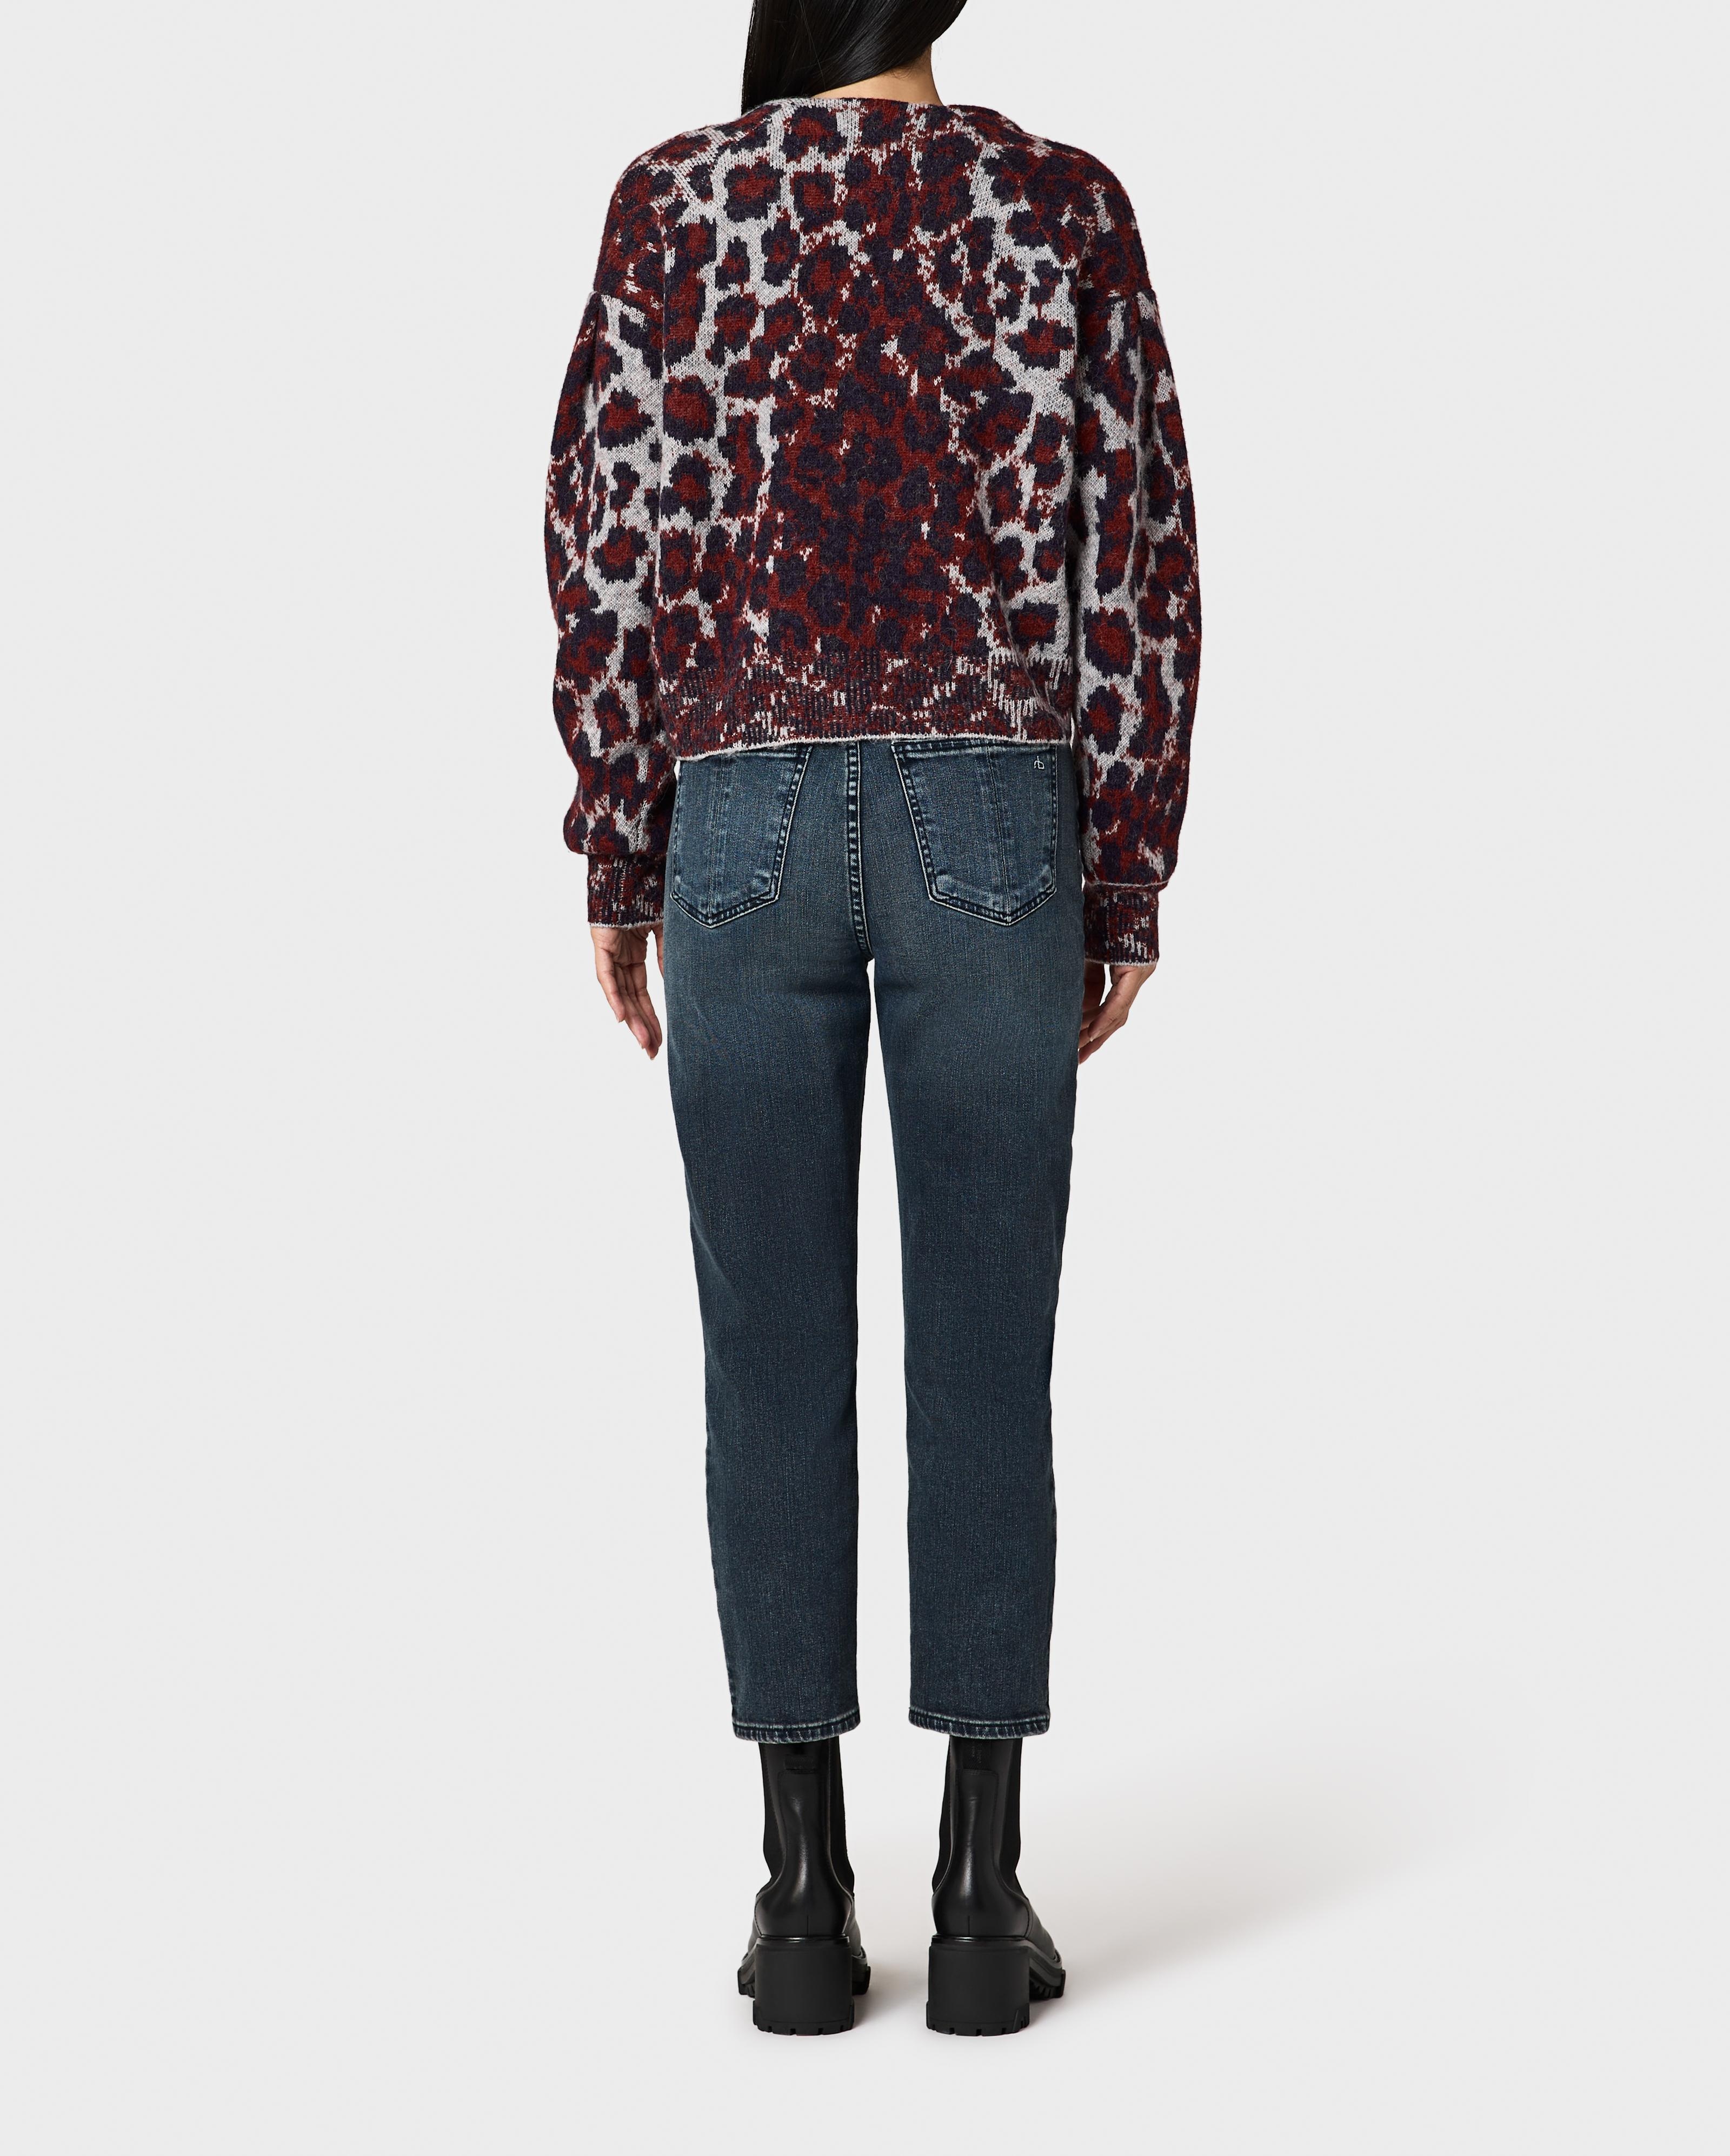 Sarah Wool Leopard Cardigan
Relaxed Fit - 3